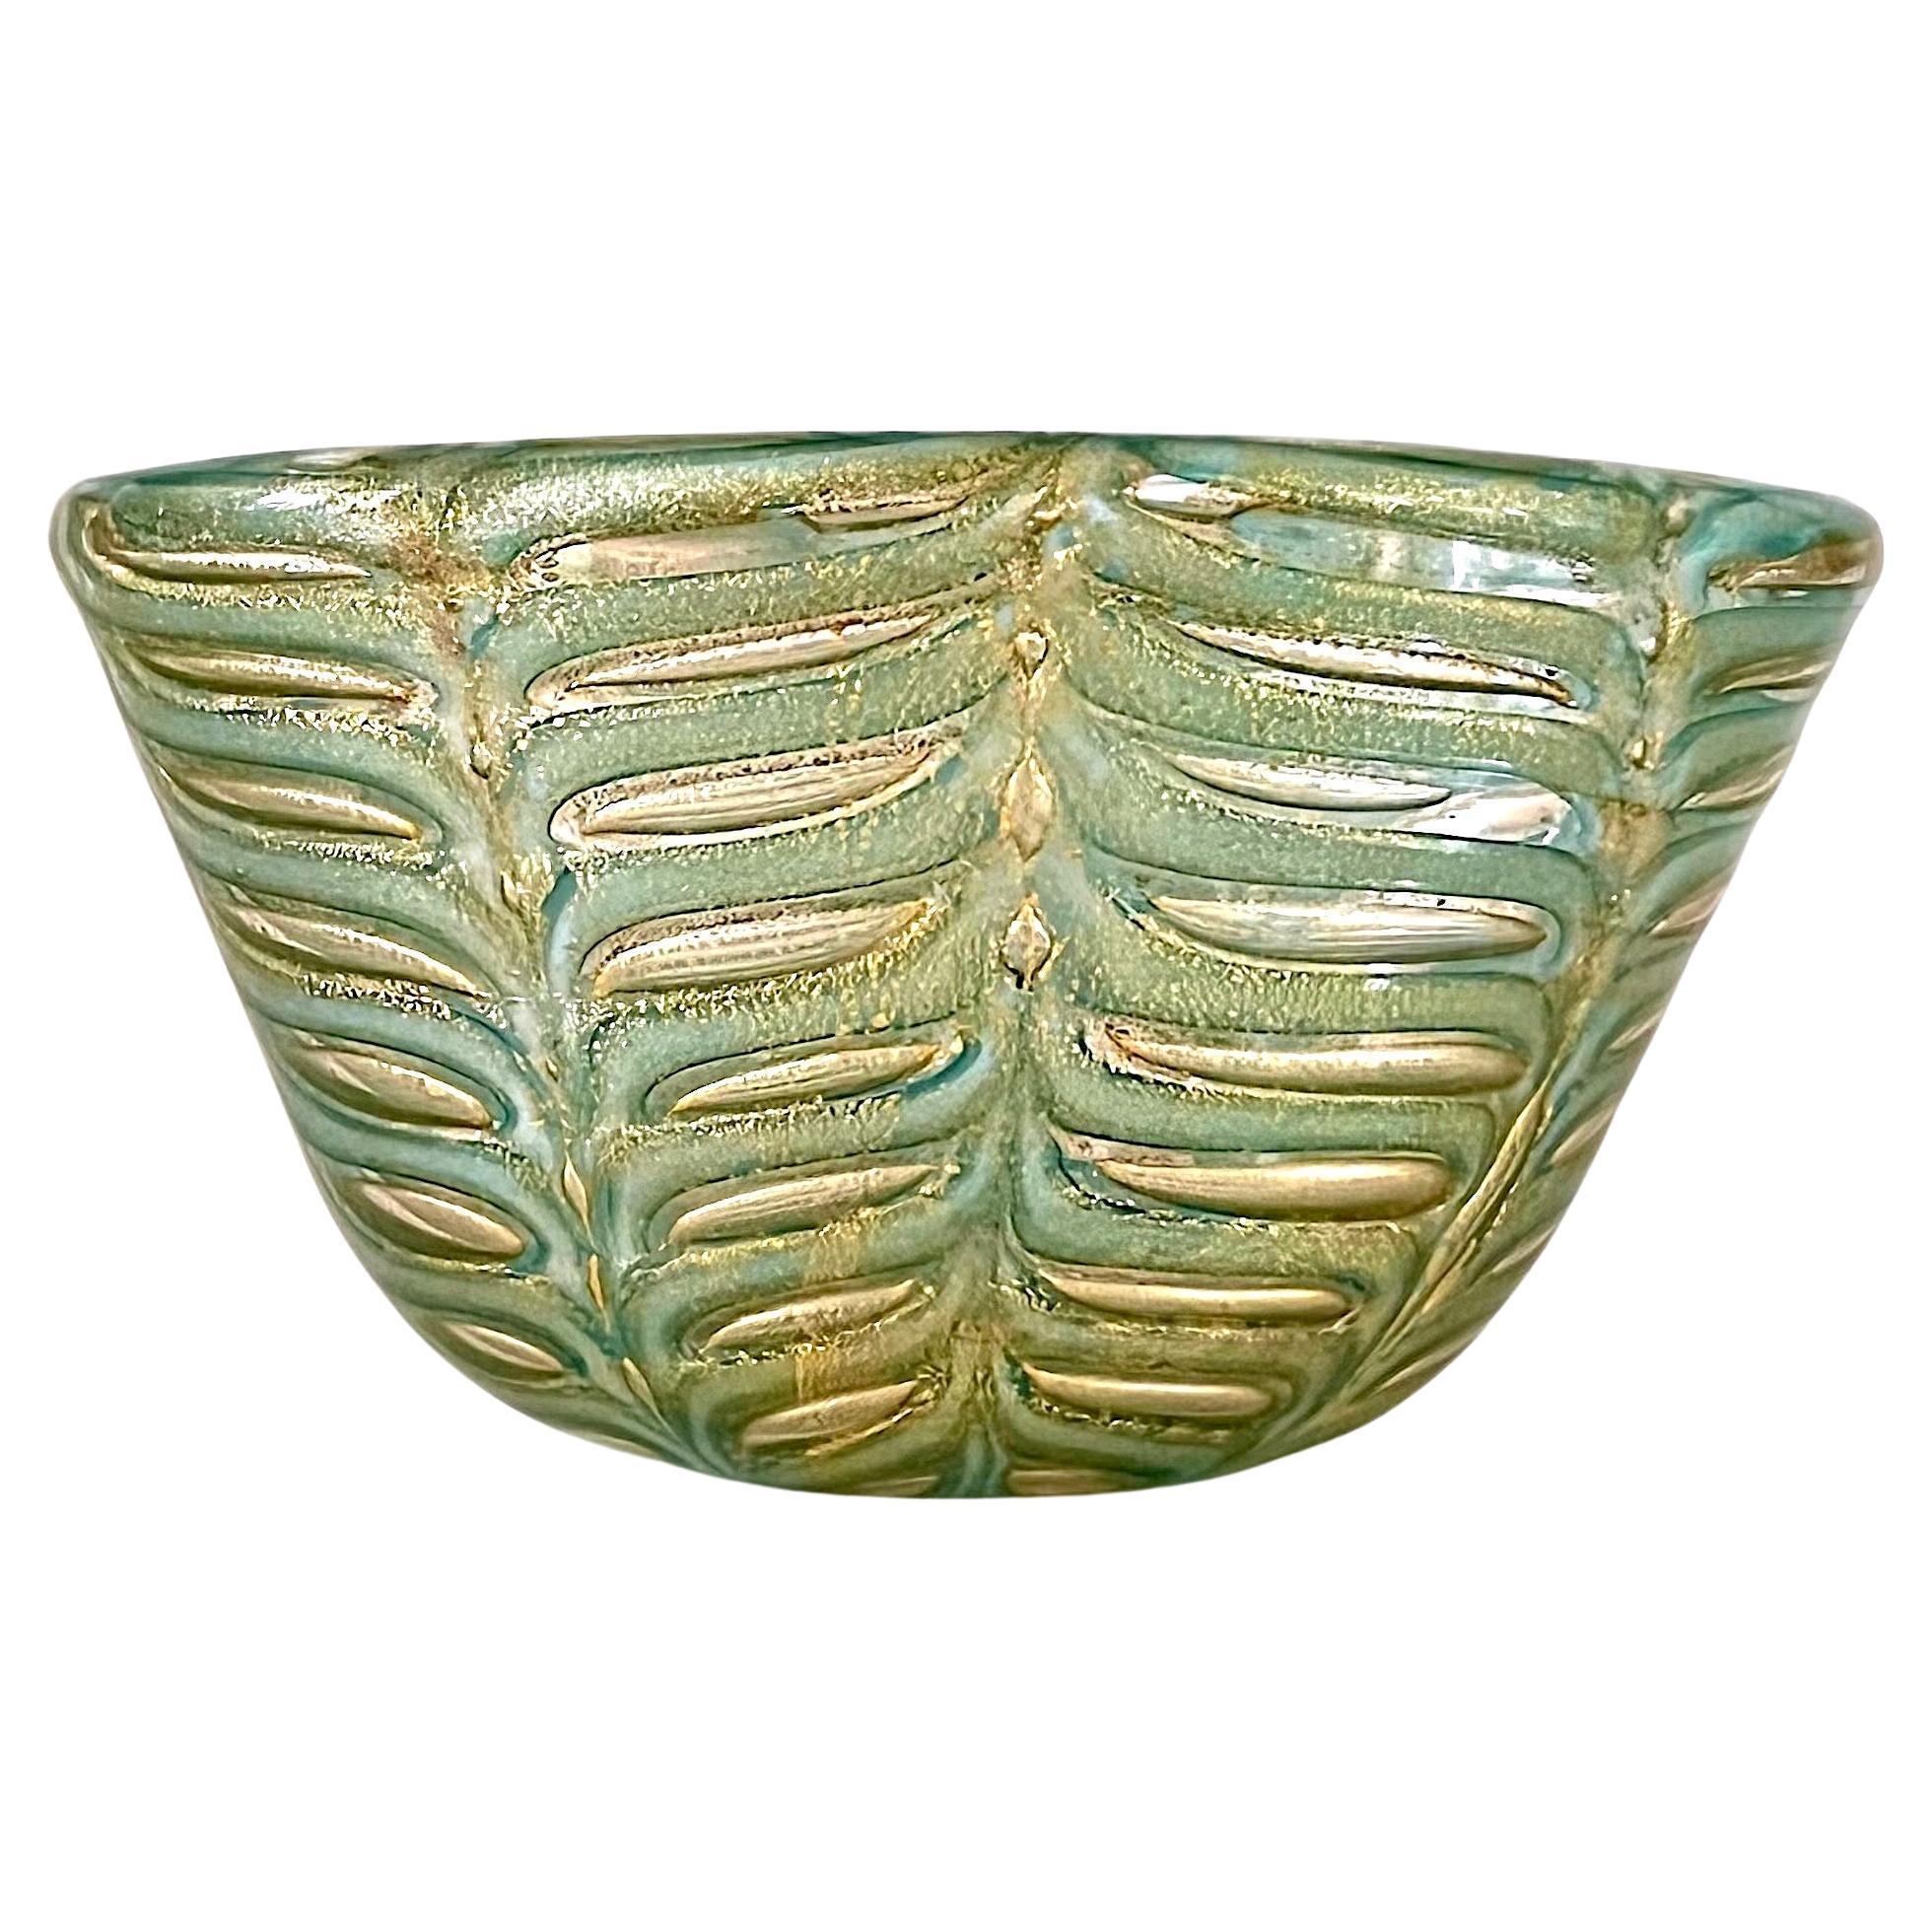 Ercole Barovier Murano Green and Gold Leaf Graffito Bowl For Sale